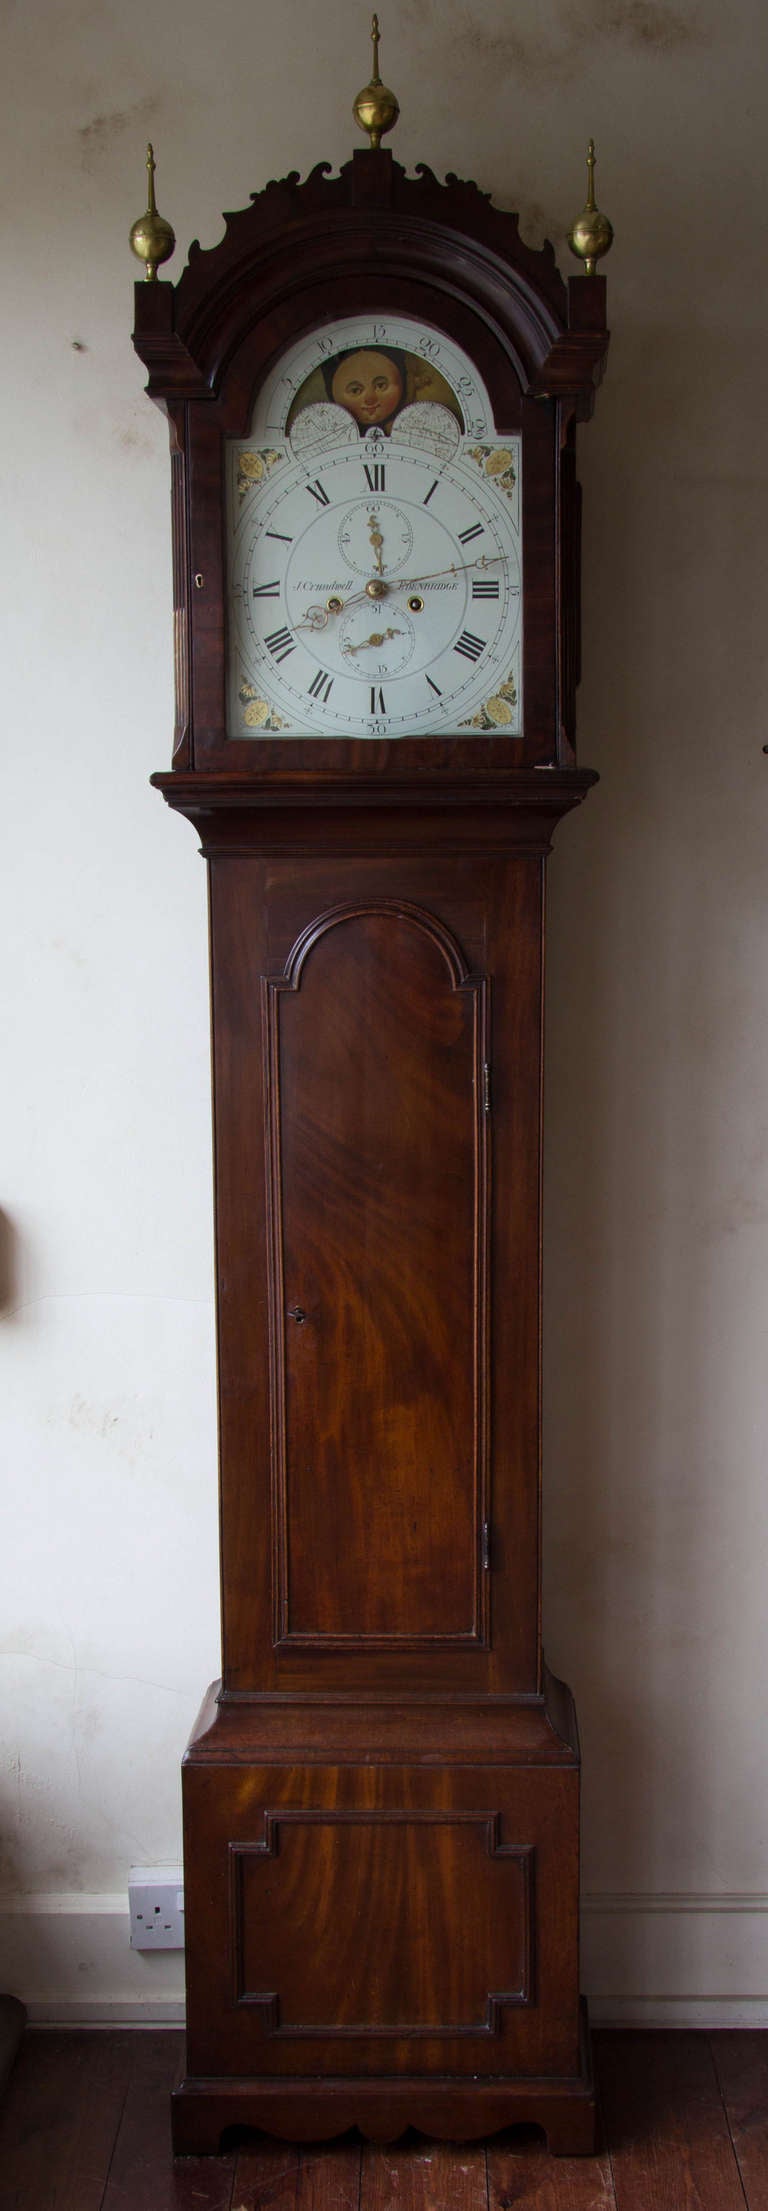 Eight day, weight driven movement with a painted iron dial depicting the phases of the moon in the half-round, break-arch.
Mahogany veneered case with typical Kent clock features; such a the long trunk door with half-round top and delicate cresting